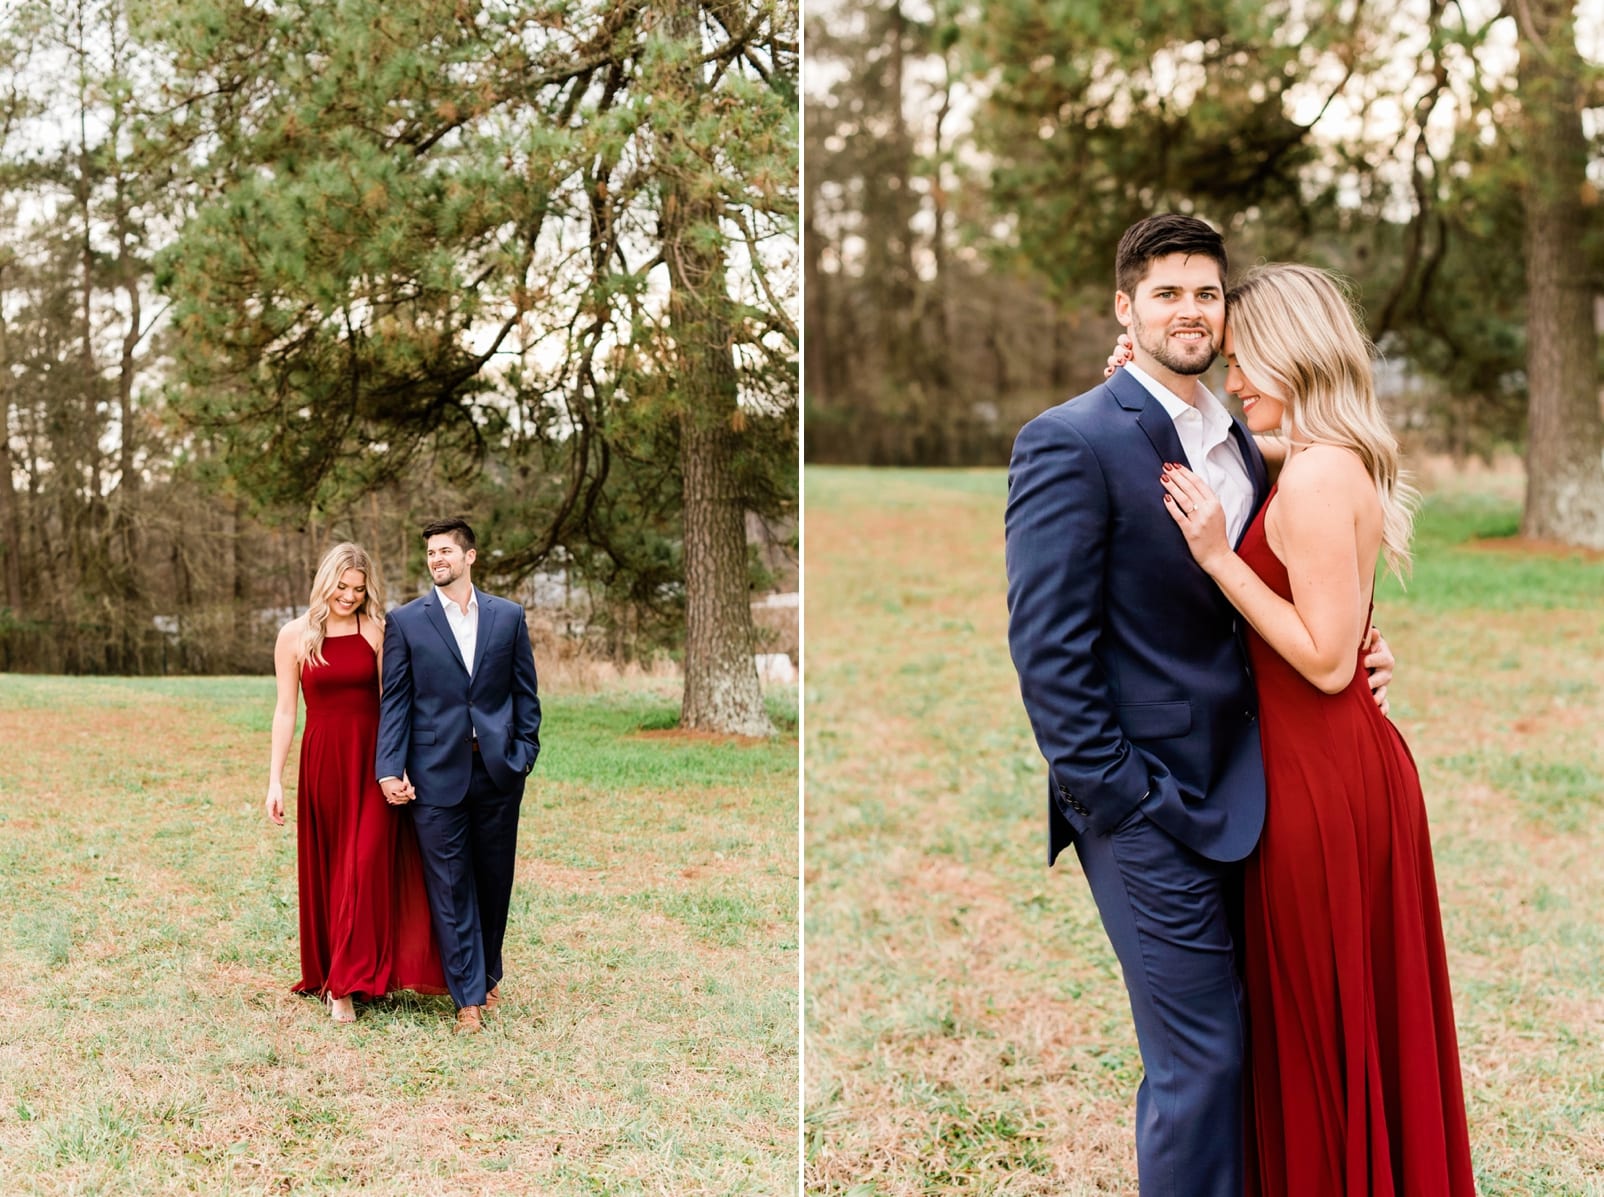 Raleigh engagement photographer couple walking through tree lined field in a blue suit and long red dress photo